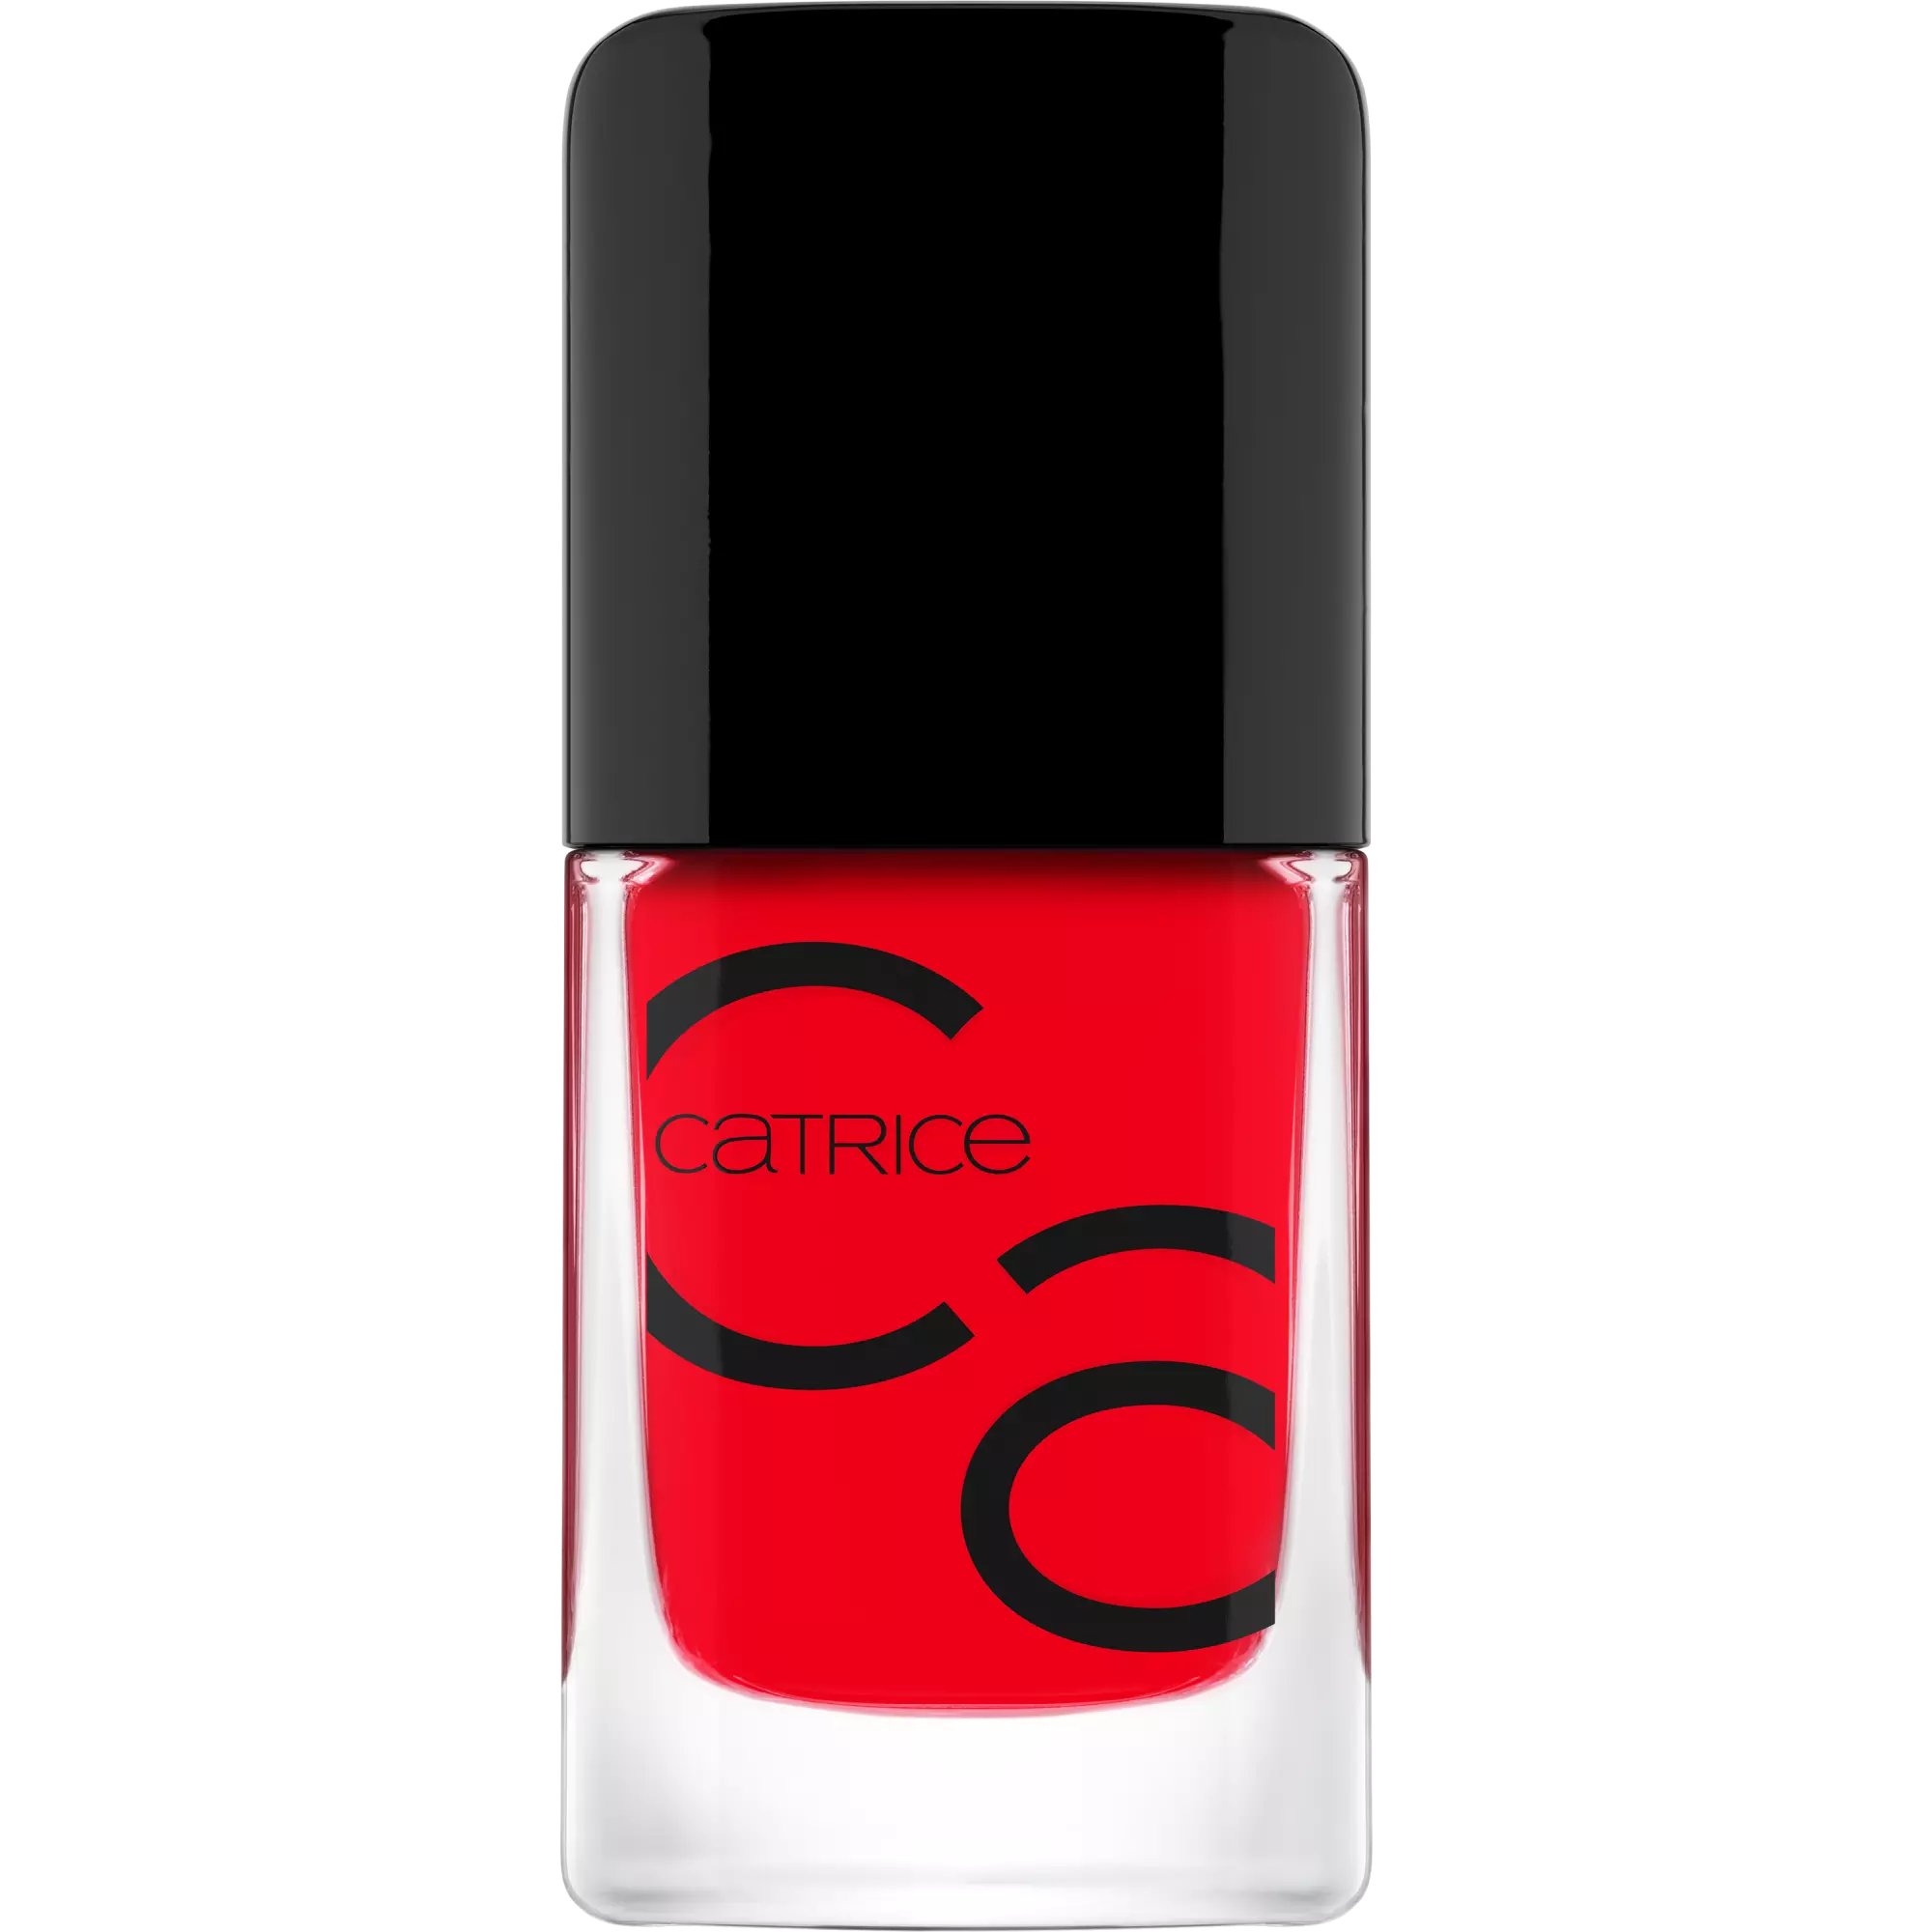 Catrice Iconails Red Nail Polish - 140 Vive l'amour